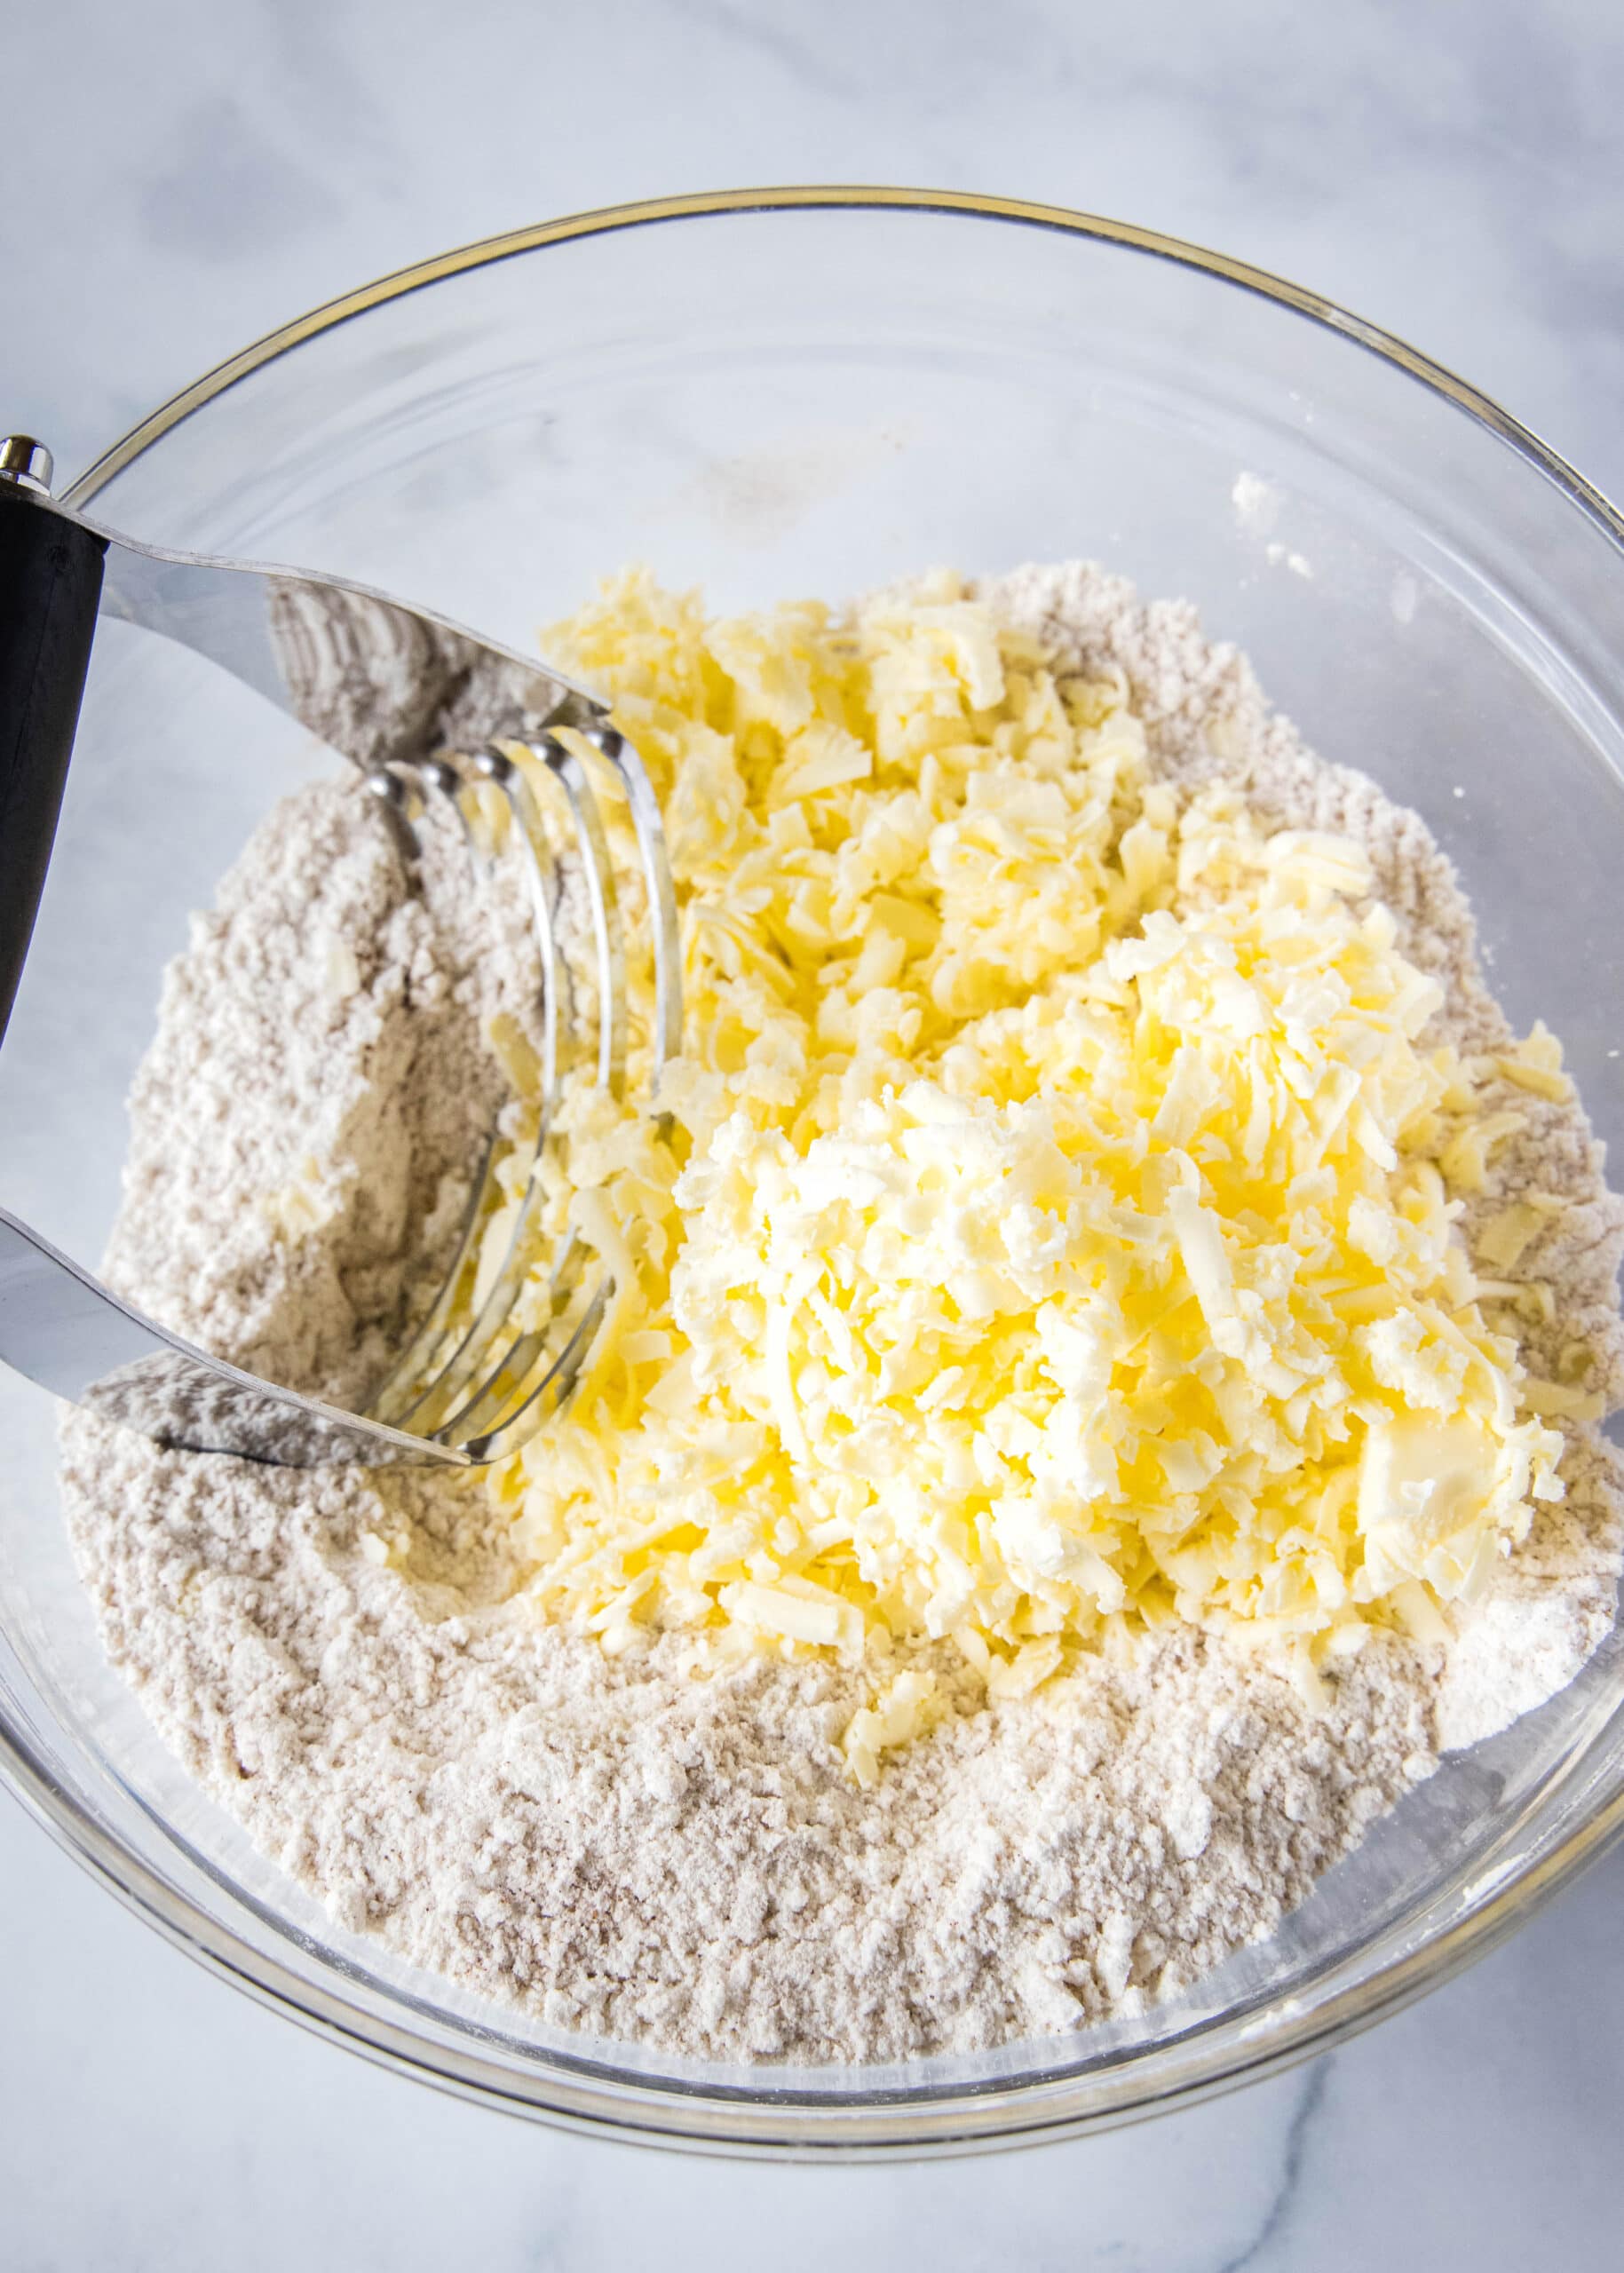 butter grated into flour mixture